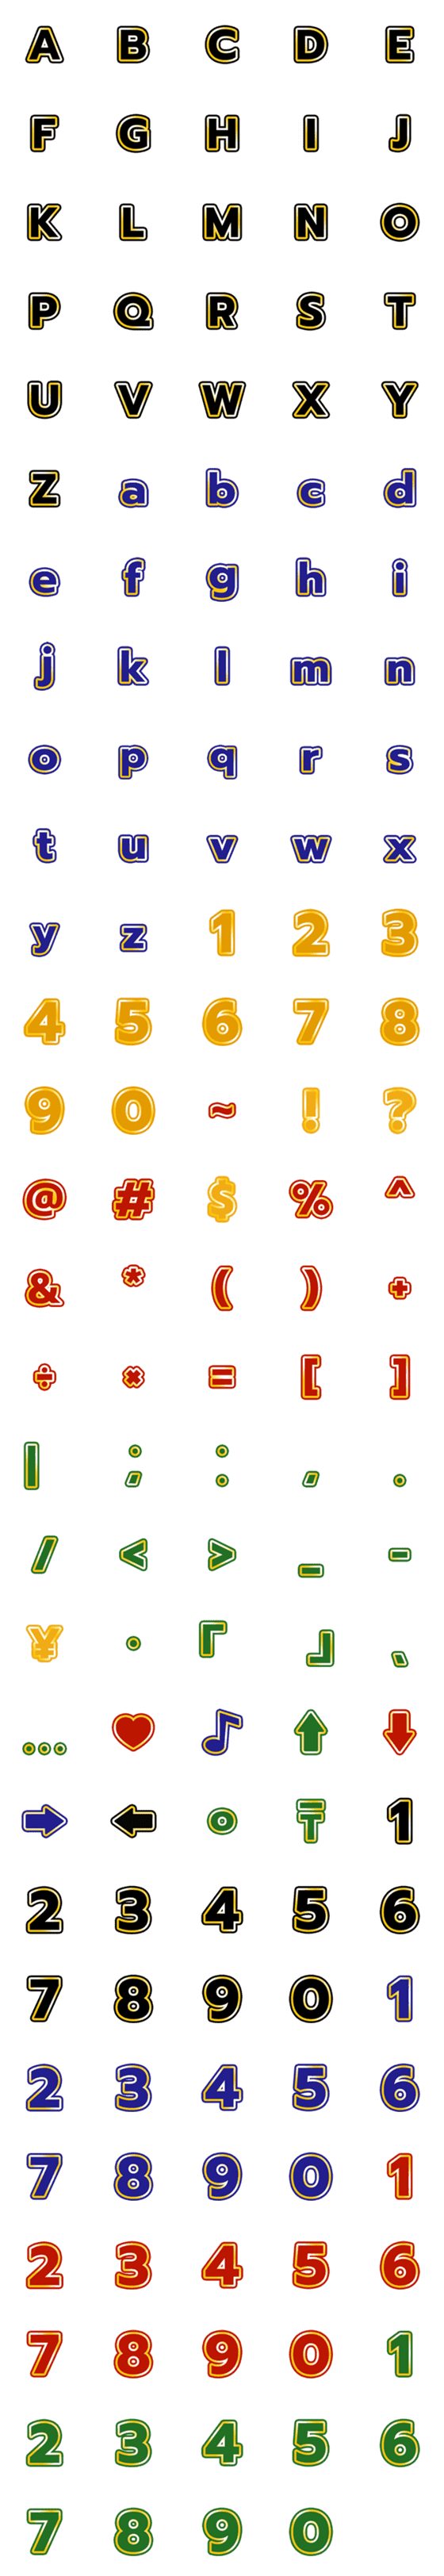 [LINE絵文字]140icon++ Classic number+ABC emojiの画像一覧